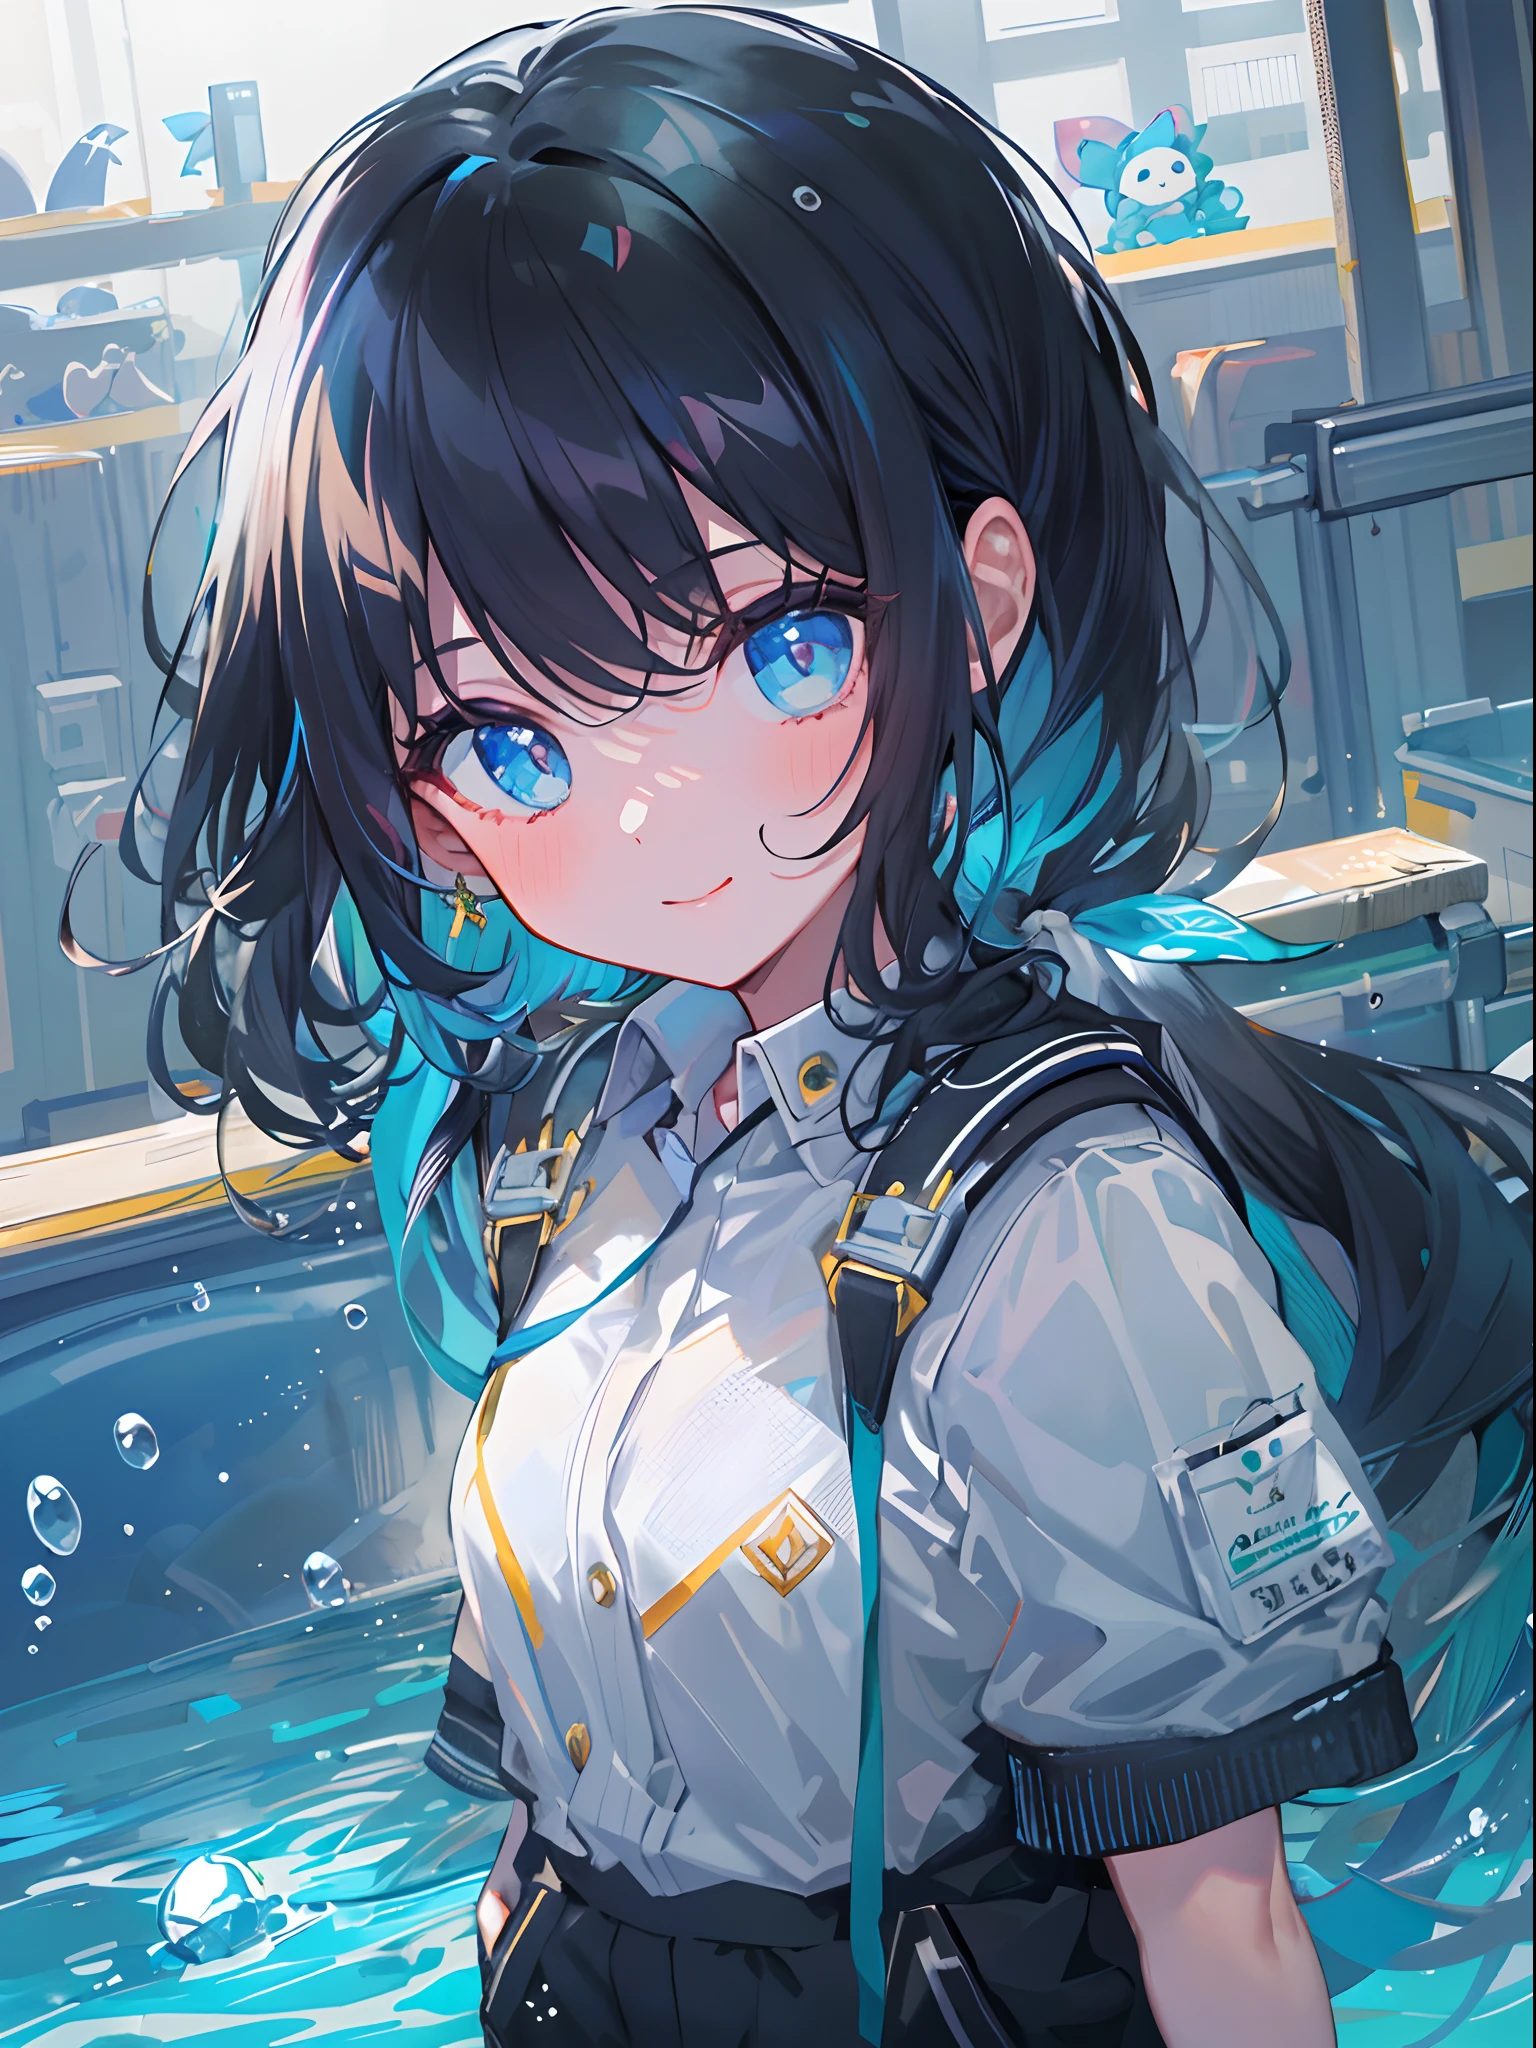 ((top-quality)), ((​masterpiece)), ((Ultra-detail)), (extremely delicate and beautiful), girl with, solo, cold attitude,((Black jacket)),She is very(relax)with  the(Settled down)Looks,A darK-haired, depth of fields,evil smile,Bubble, under the water, Air bubble,bright light blue eyes,Inner color with black hair and light blue tips,Cold background,Bob Hair - Linear Art, shortpants、knee high socks、White uniform like 、Light blue ribbon ties、Clothes are sheer、Hands in pockets、Ponytail hair